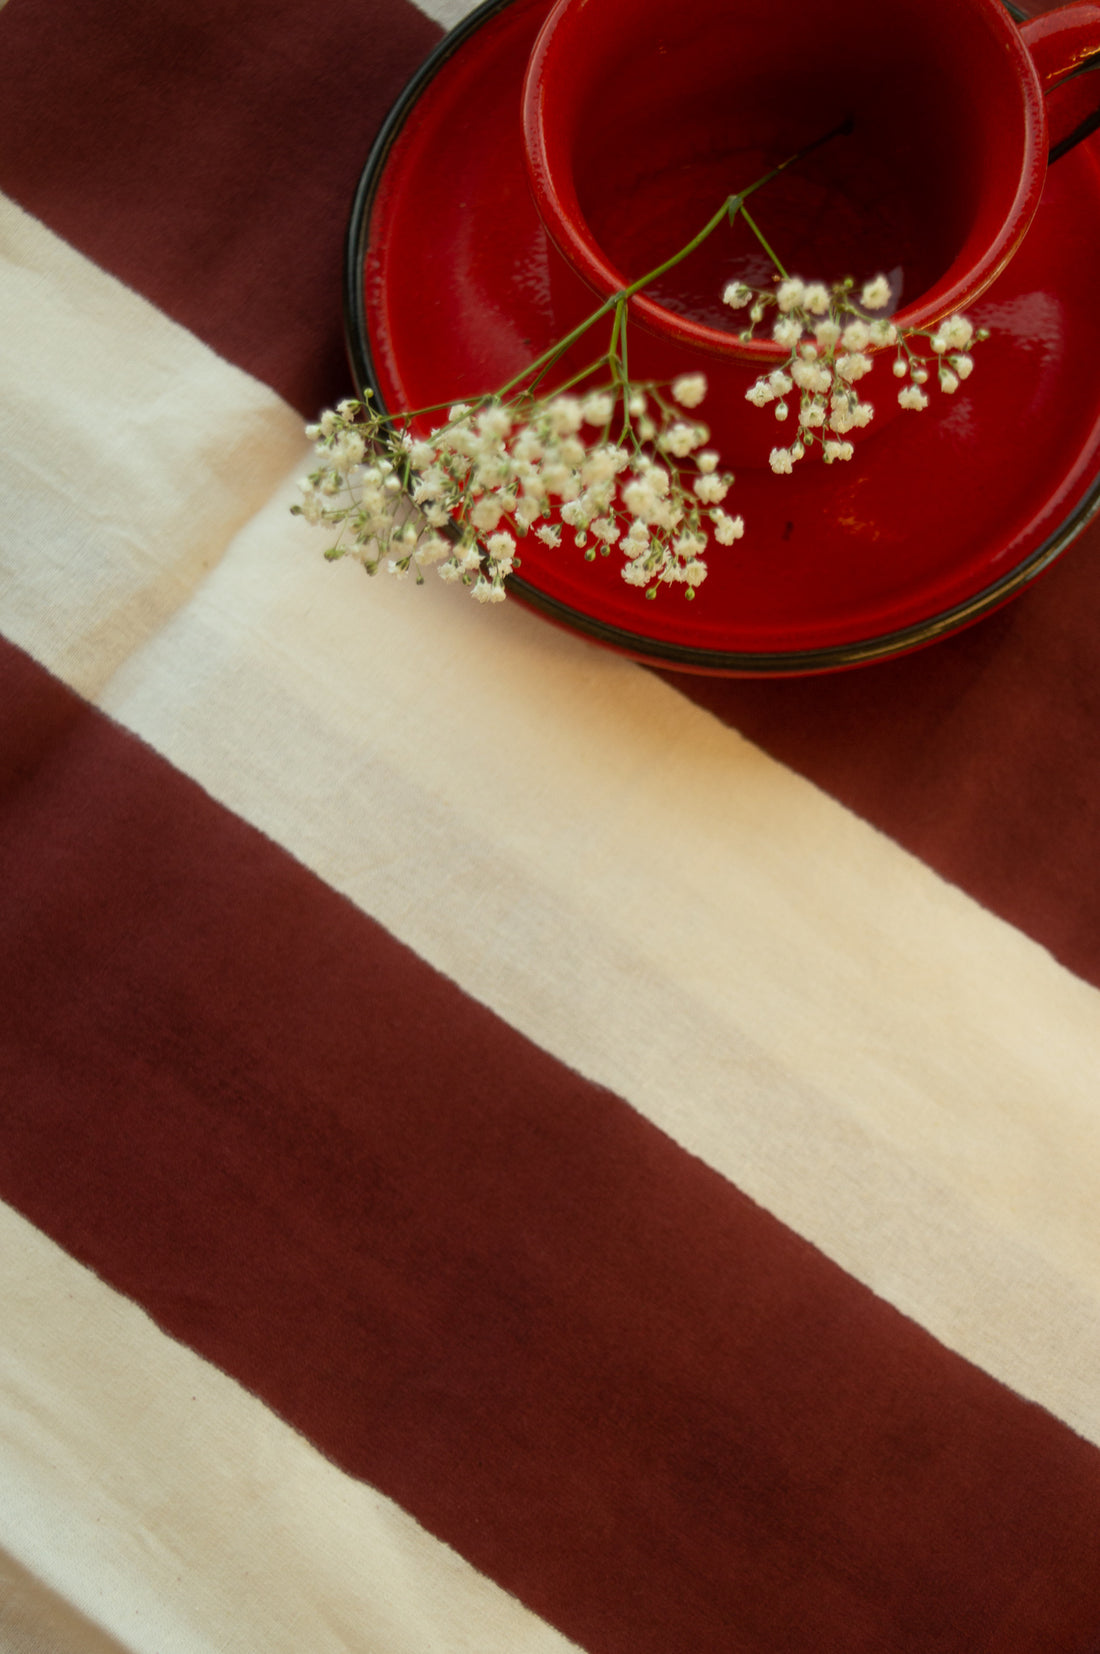 Indian Block Print Tablecloth - Merlot and white stripe